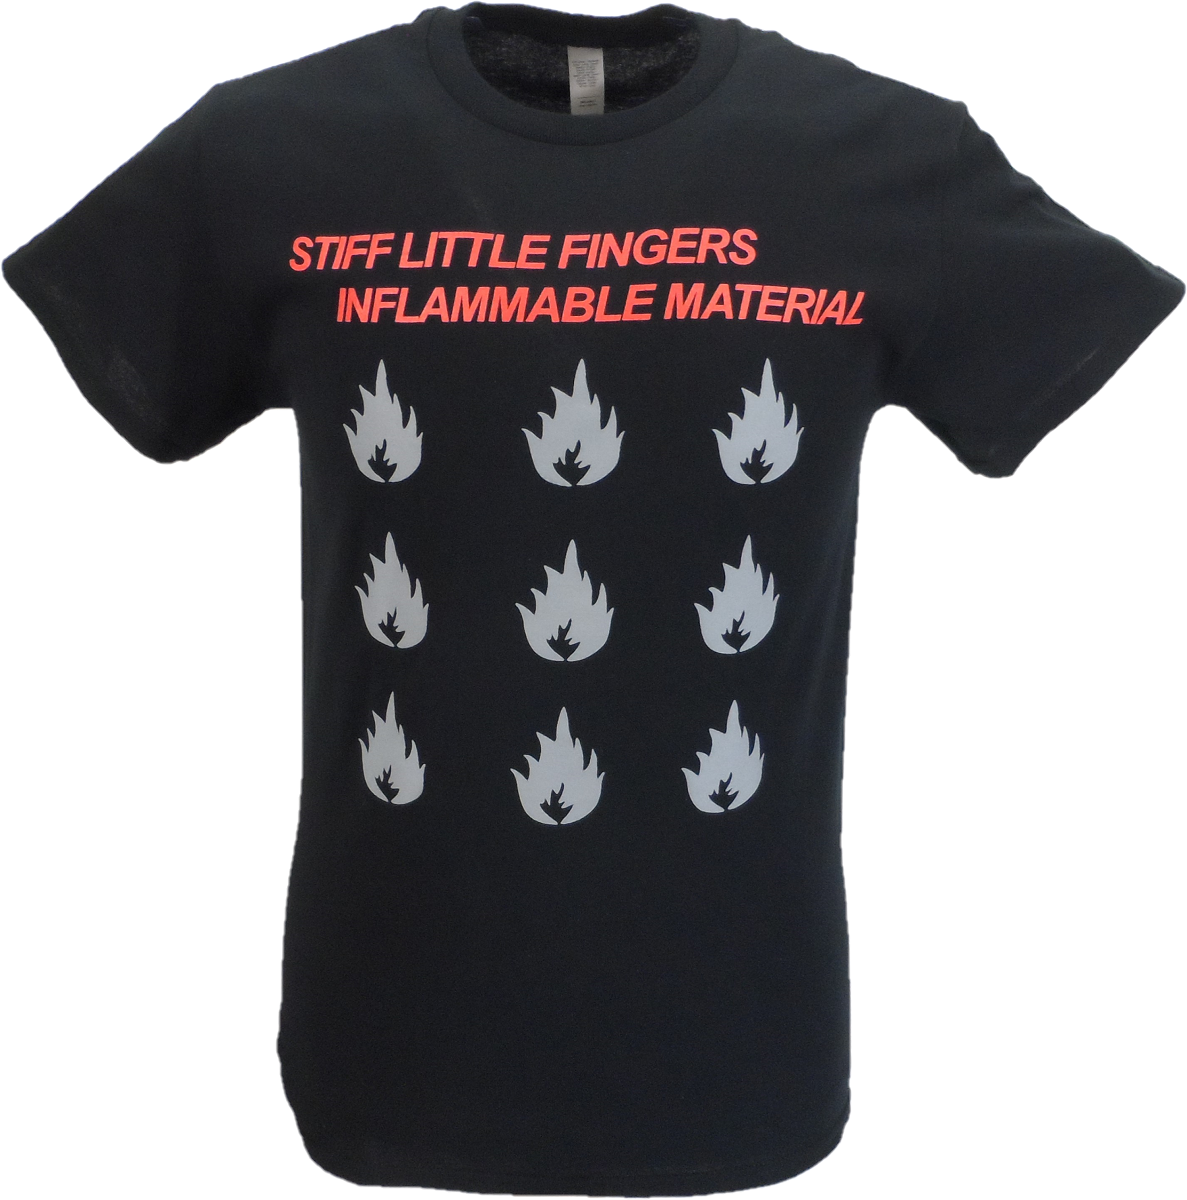 Mens Black Official Stiff Little Fingers Inflammable Material T Shirt